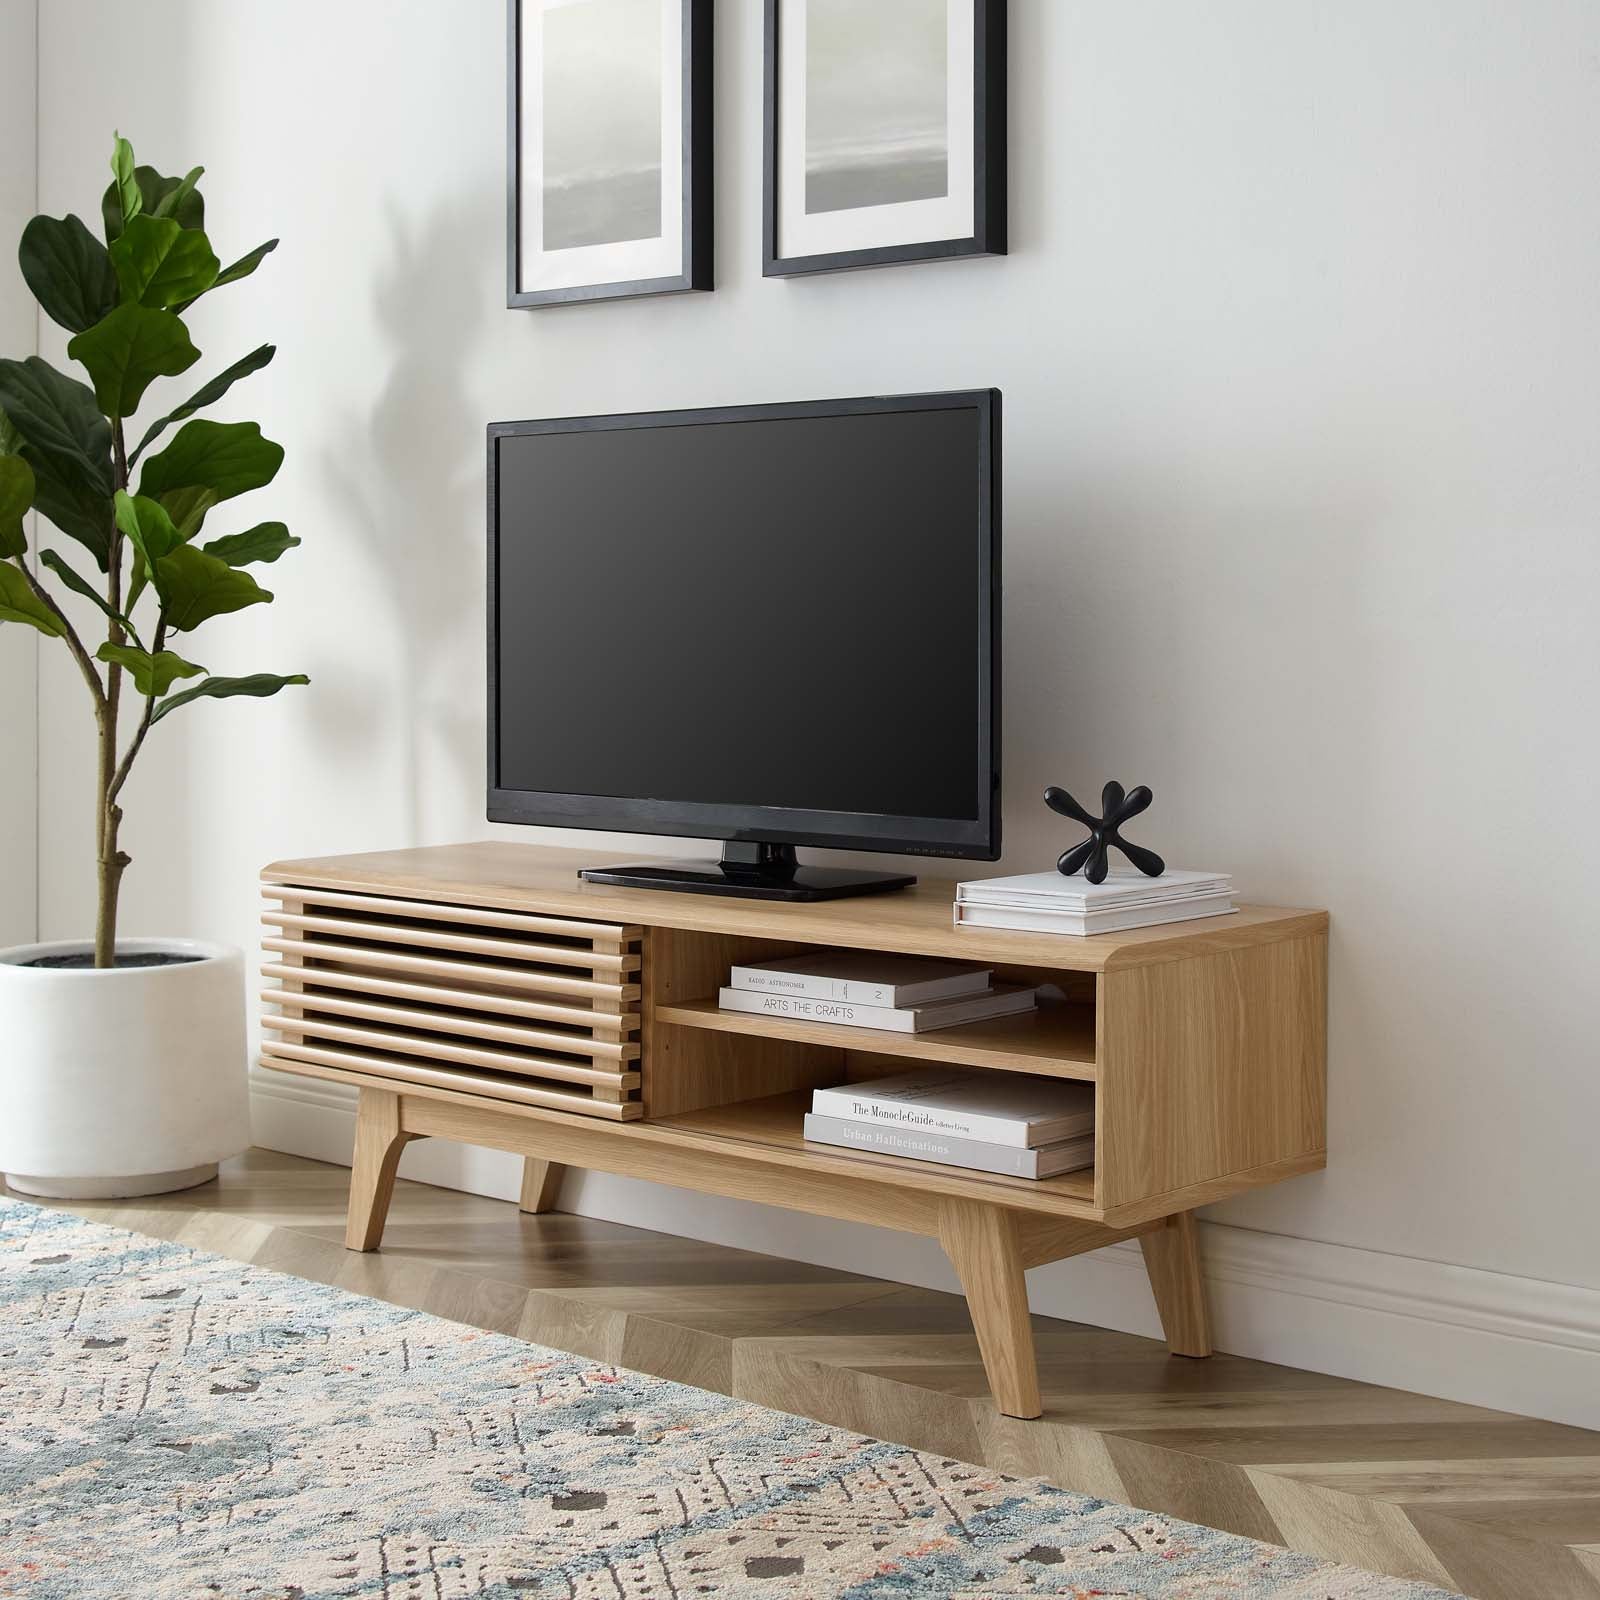 Render 48" TV Stand